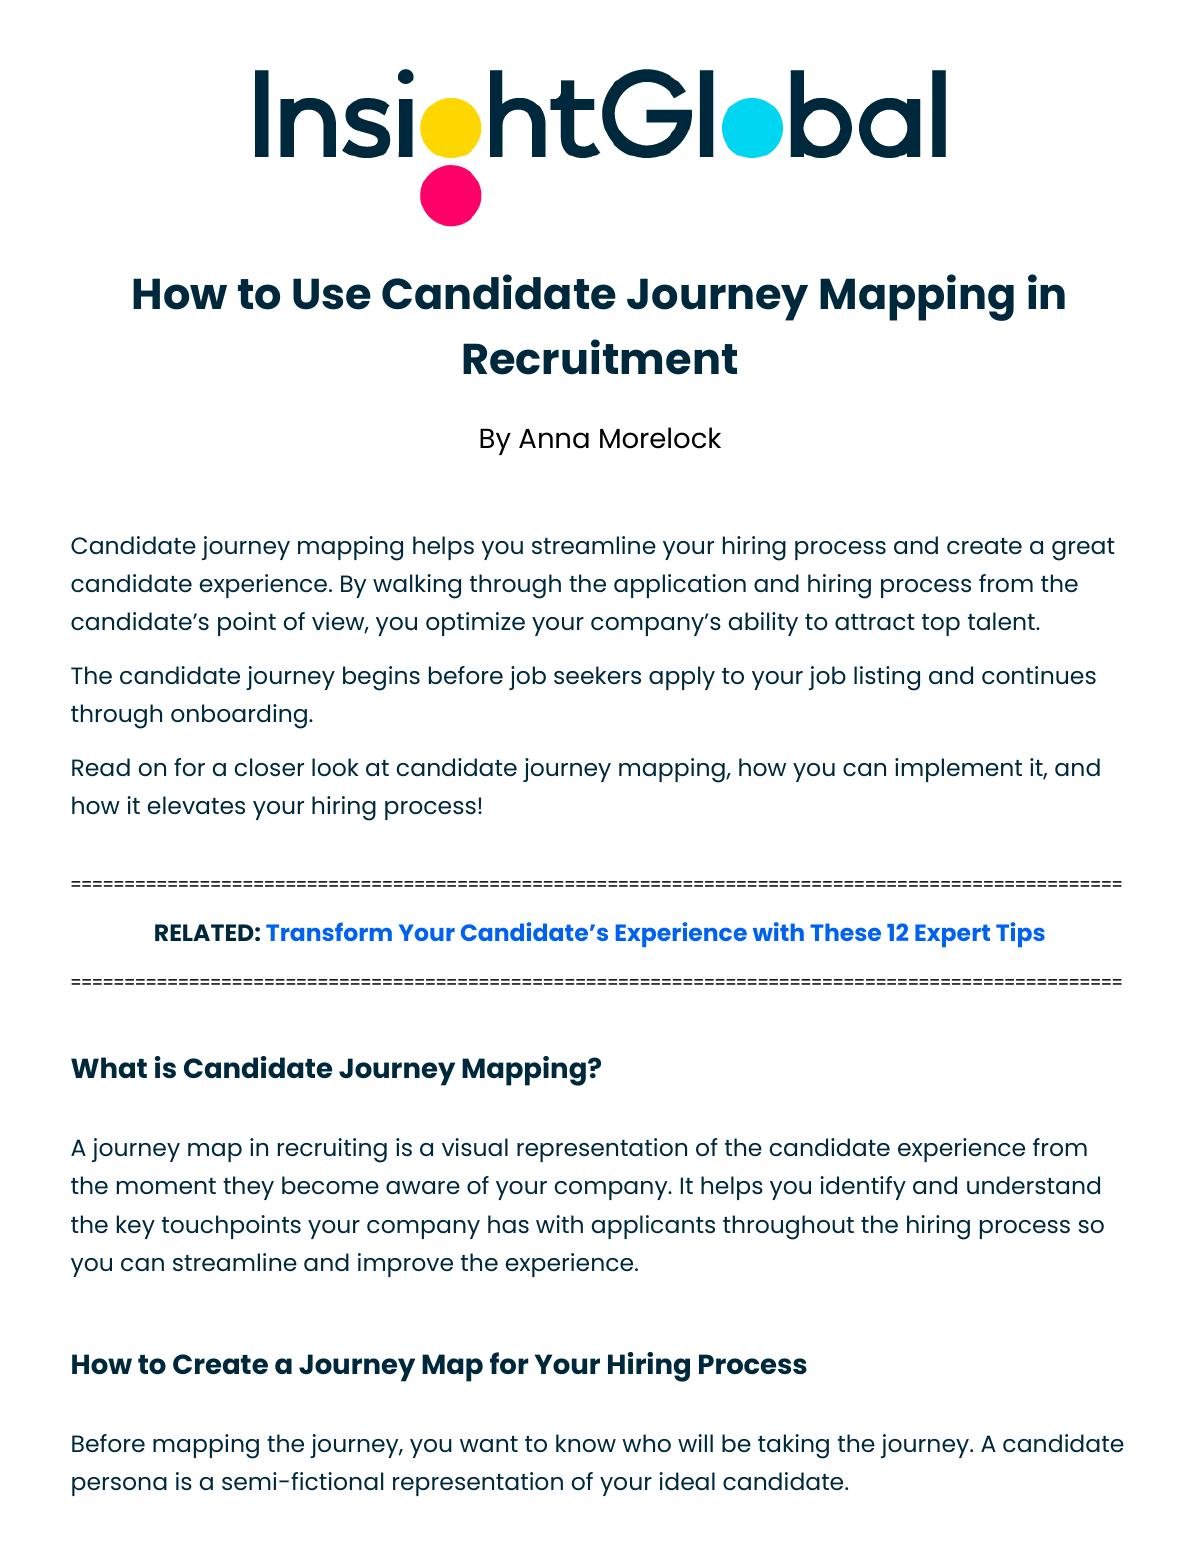 How to Use Candidate Journey Mapping in Recruitment